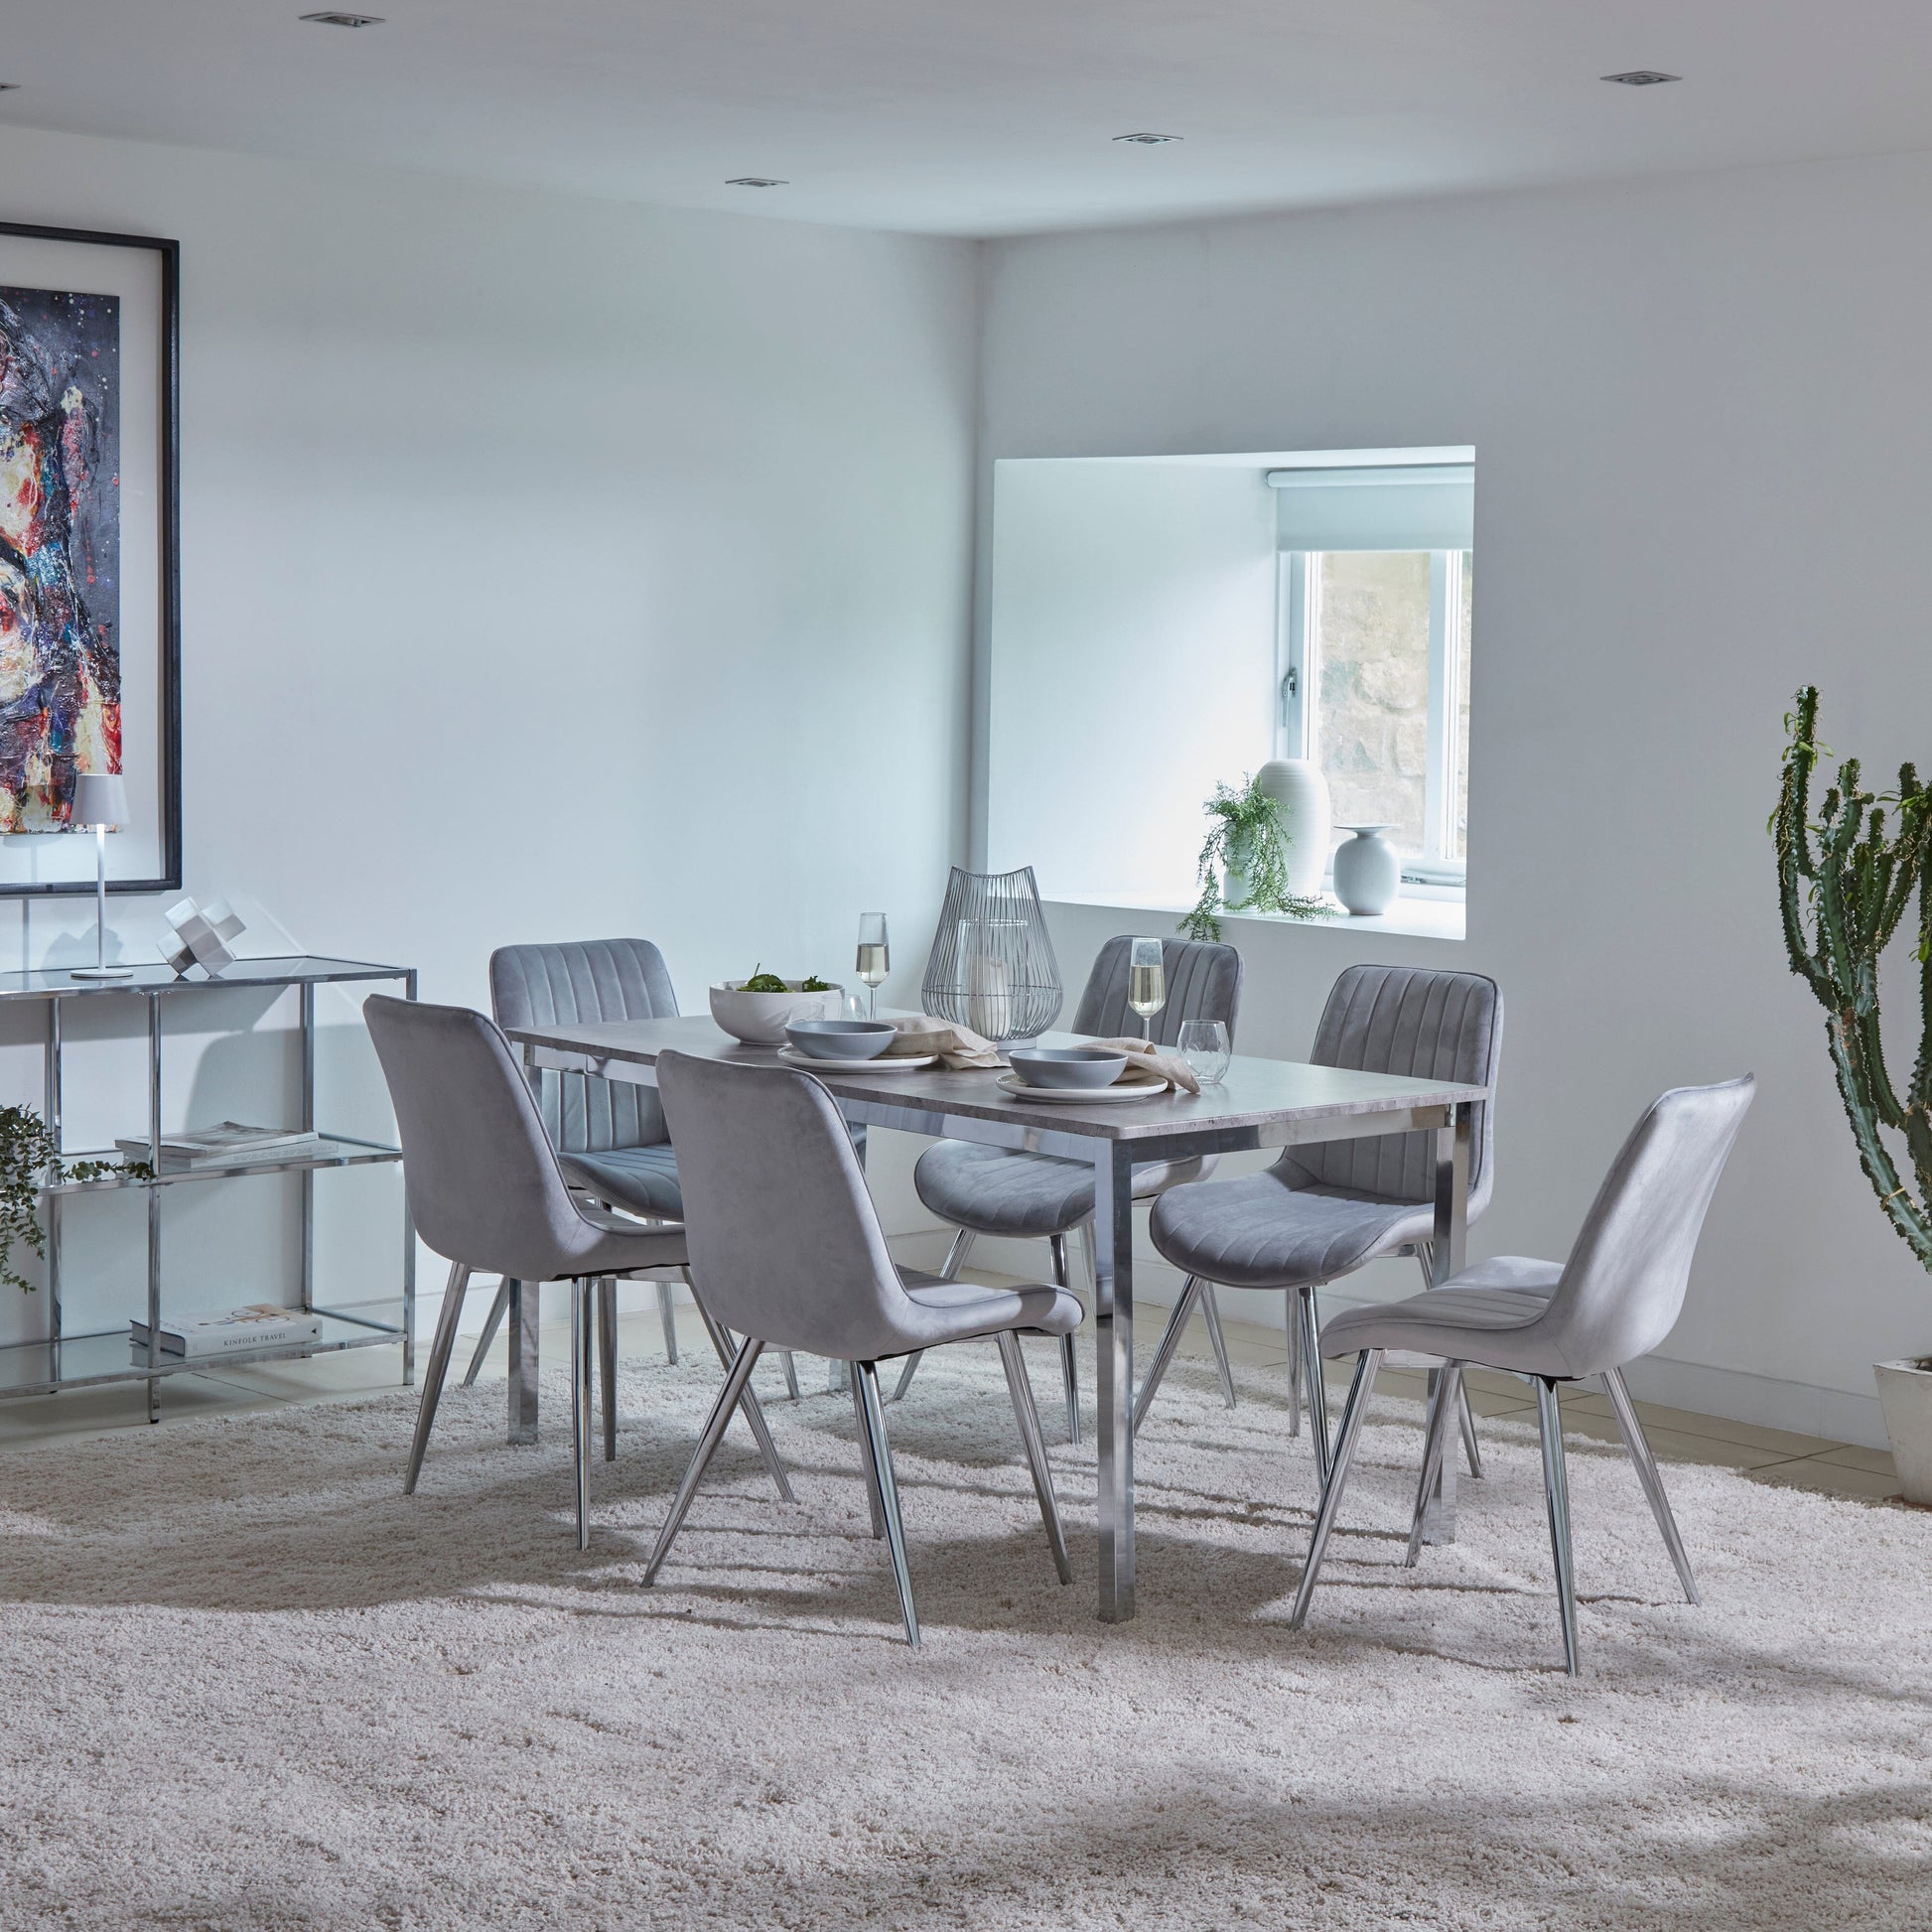 Milo Chrome Concrete Table effect Dining Table Set - 6 seater - Bella Grey and Chrome Chairs